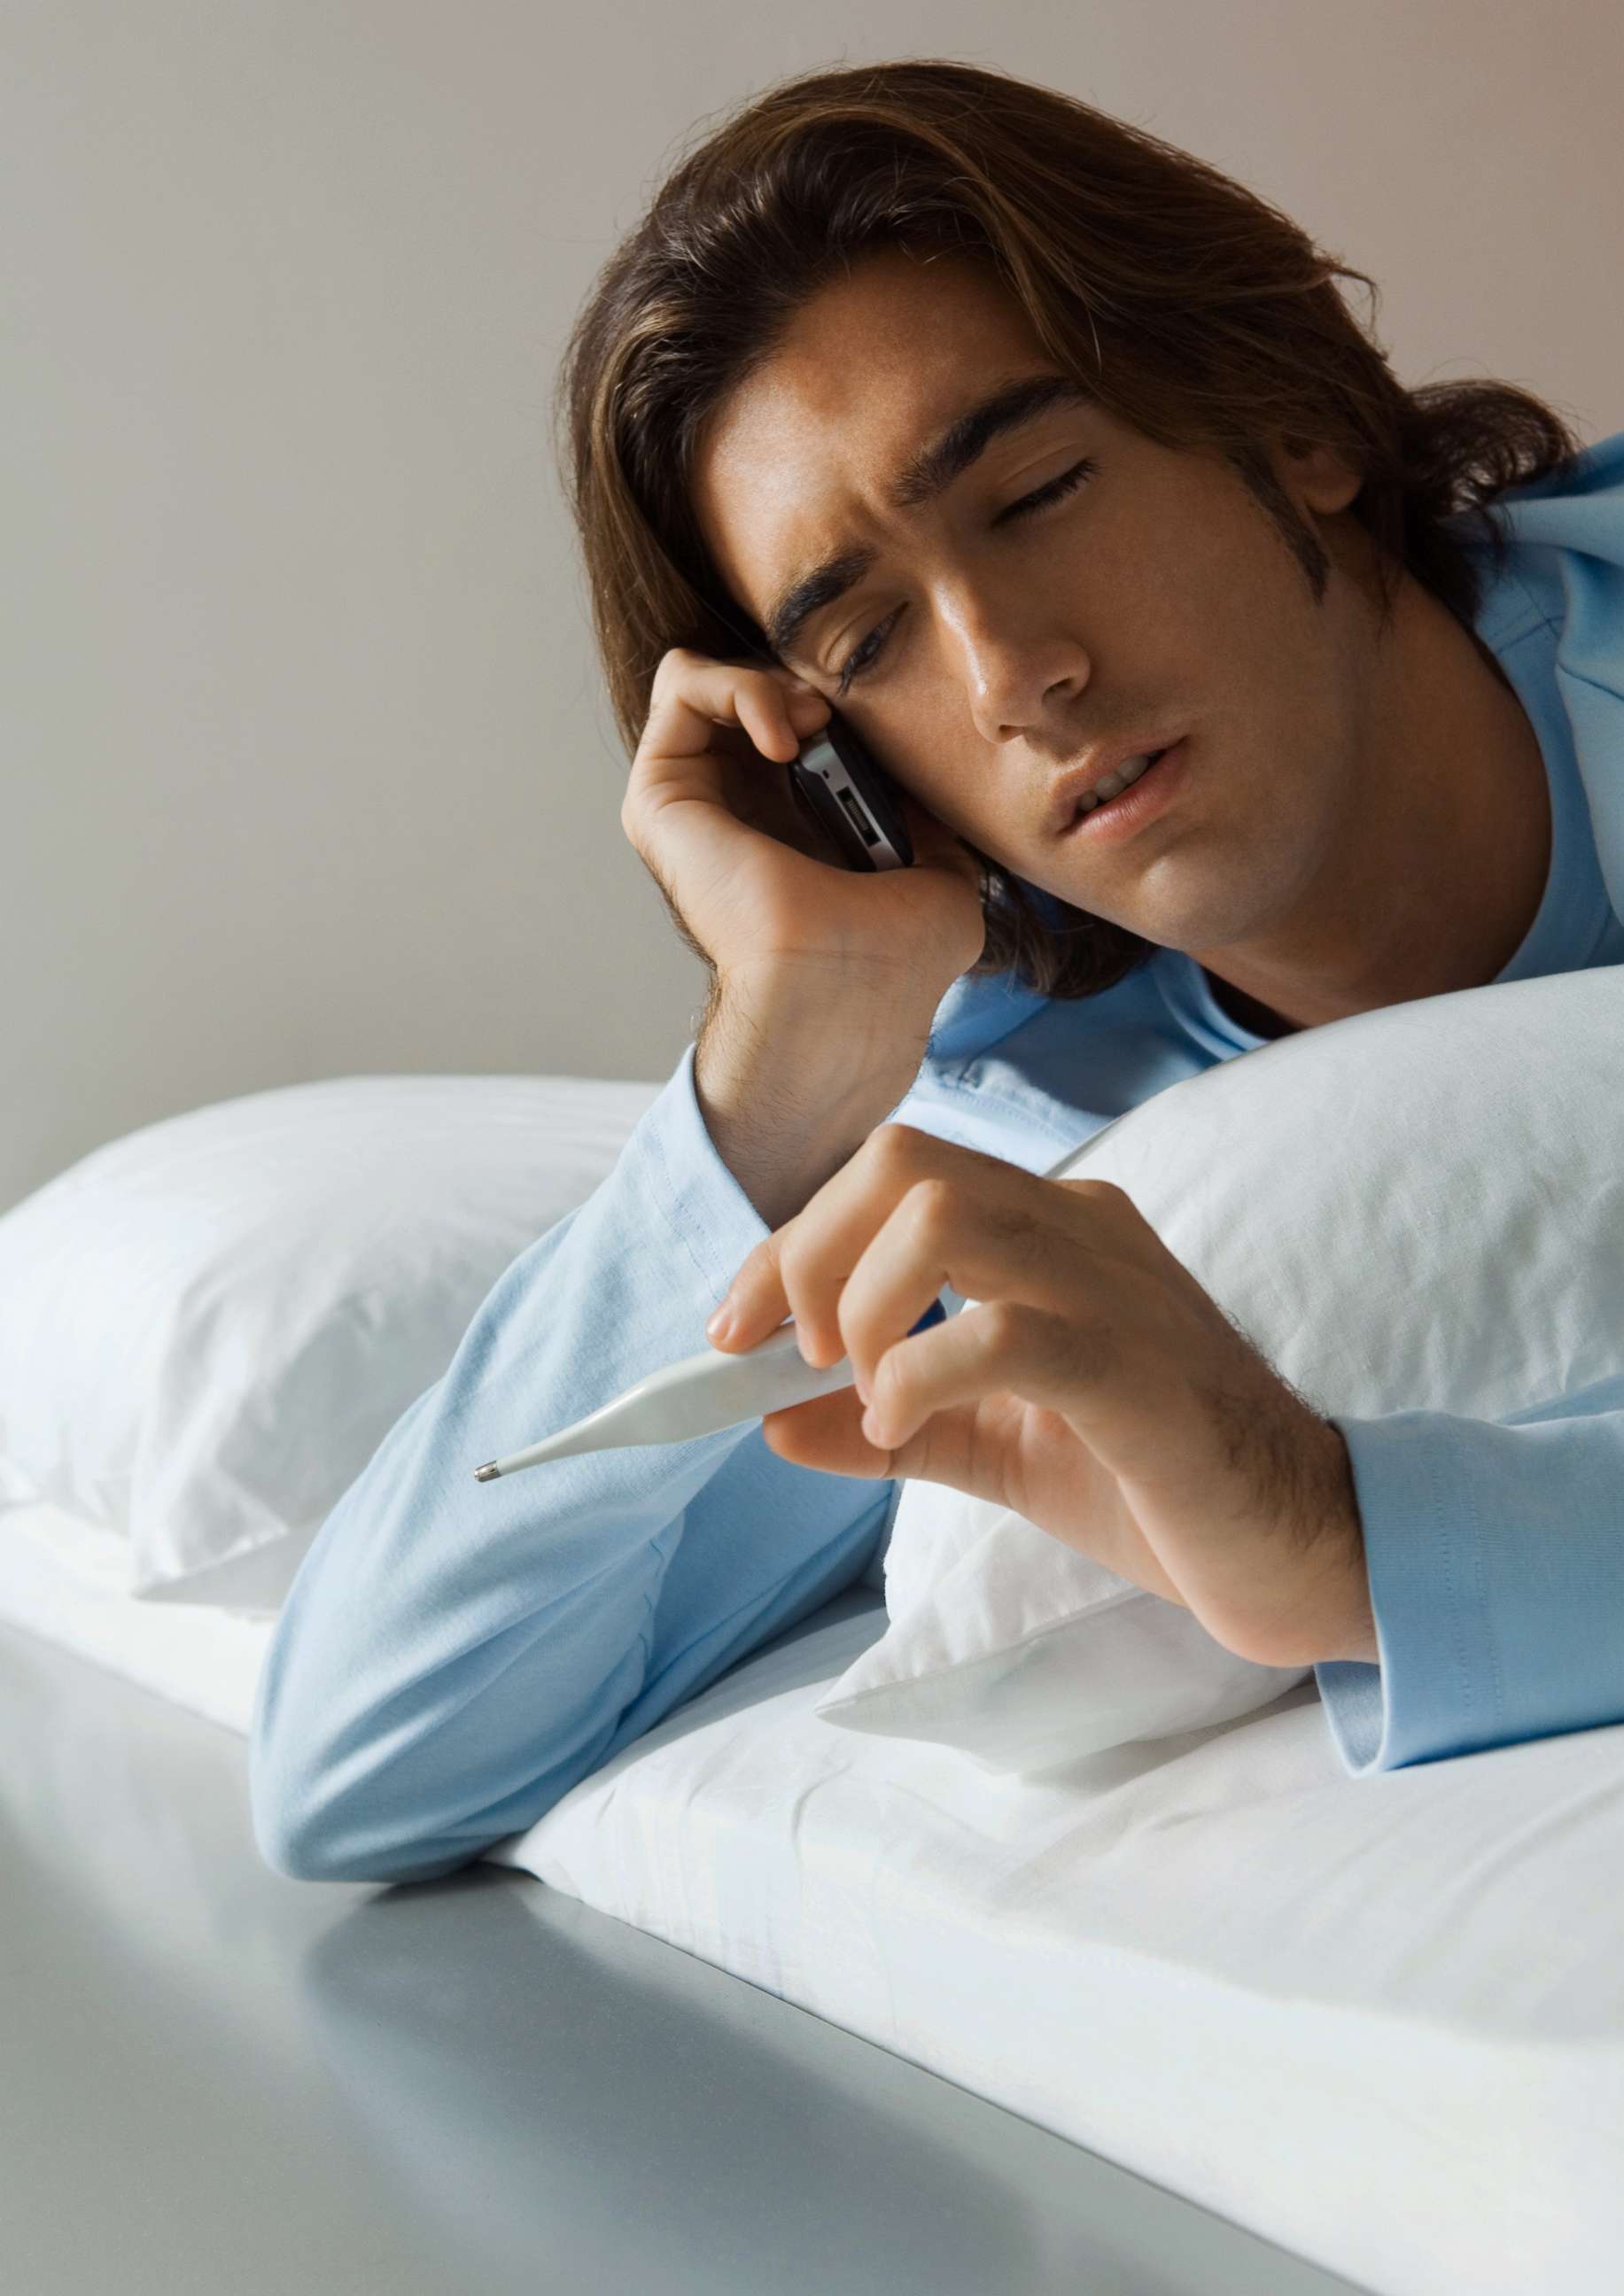 PHOTO: A man is pictured lying in bed, using a cell phone and holding up thermometer in this undated stock photo.